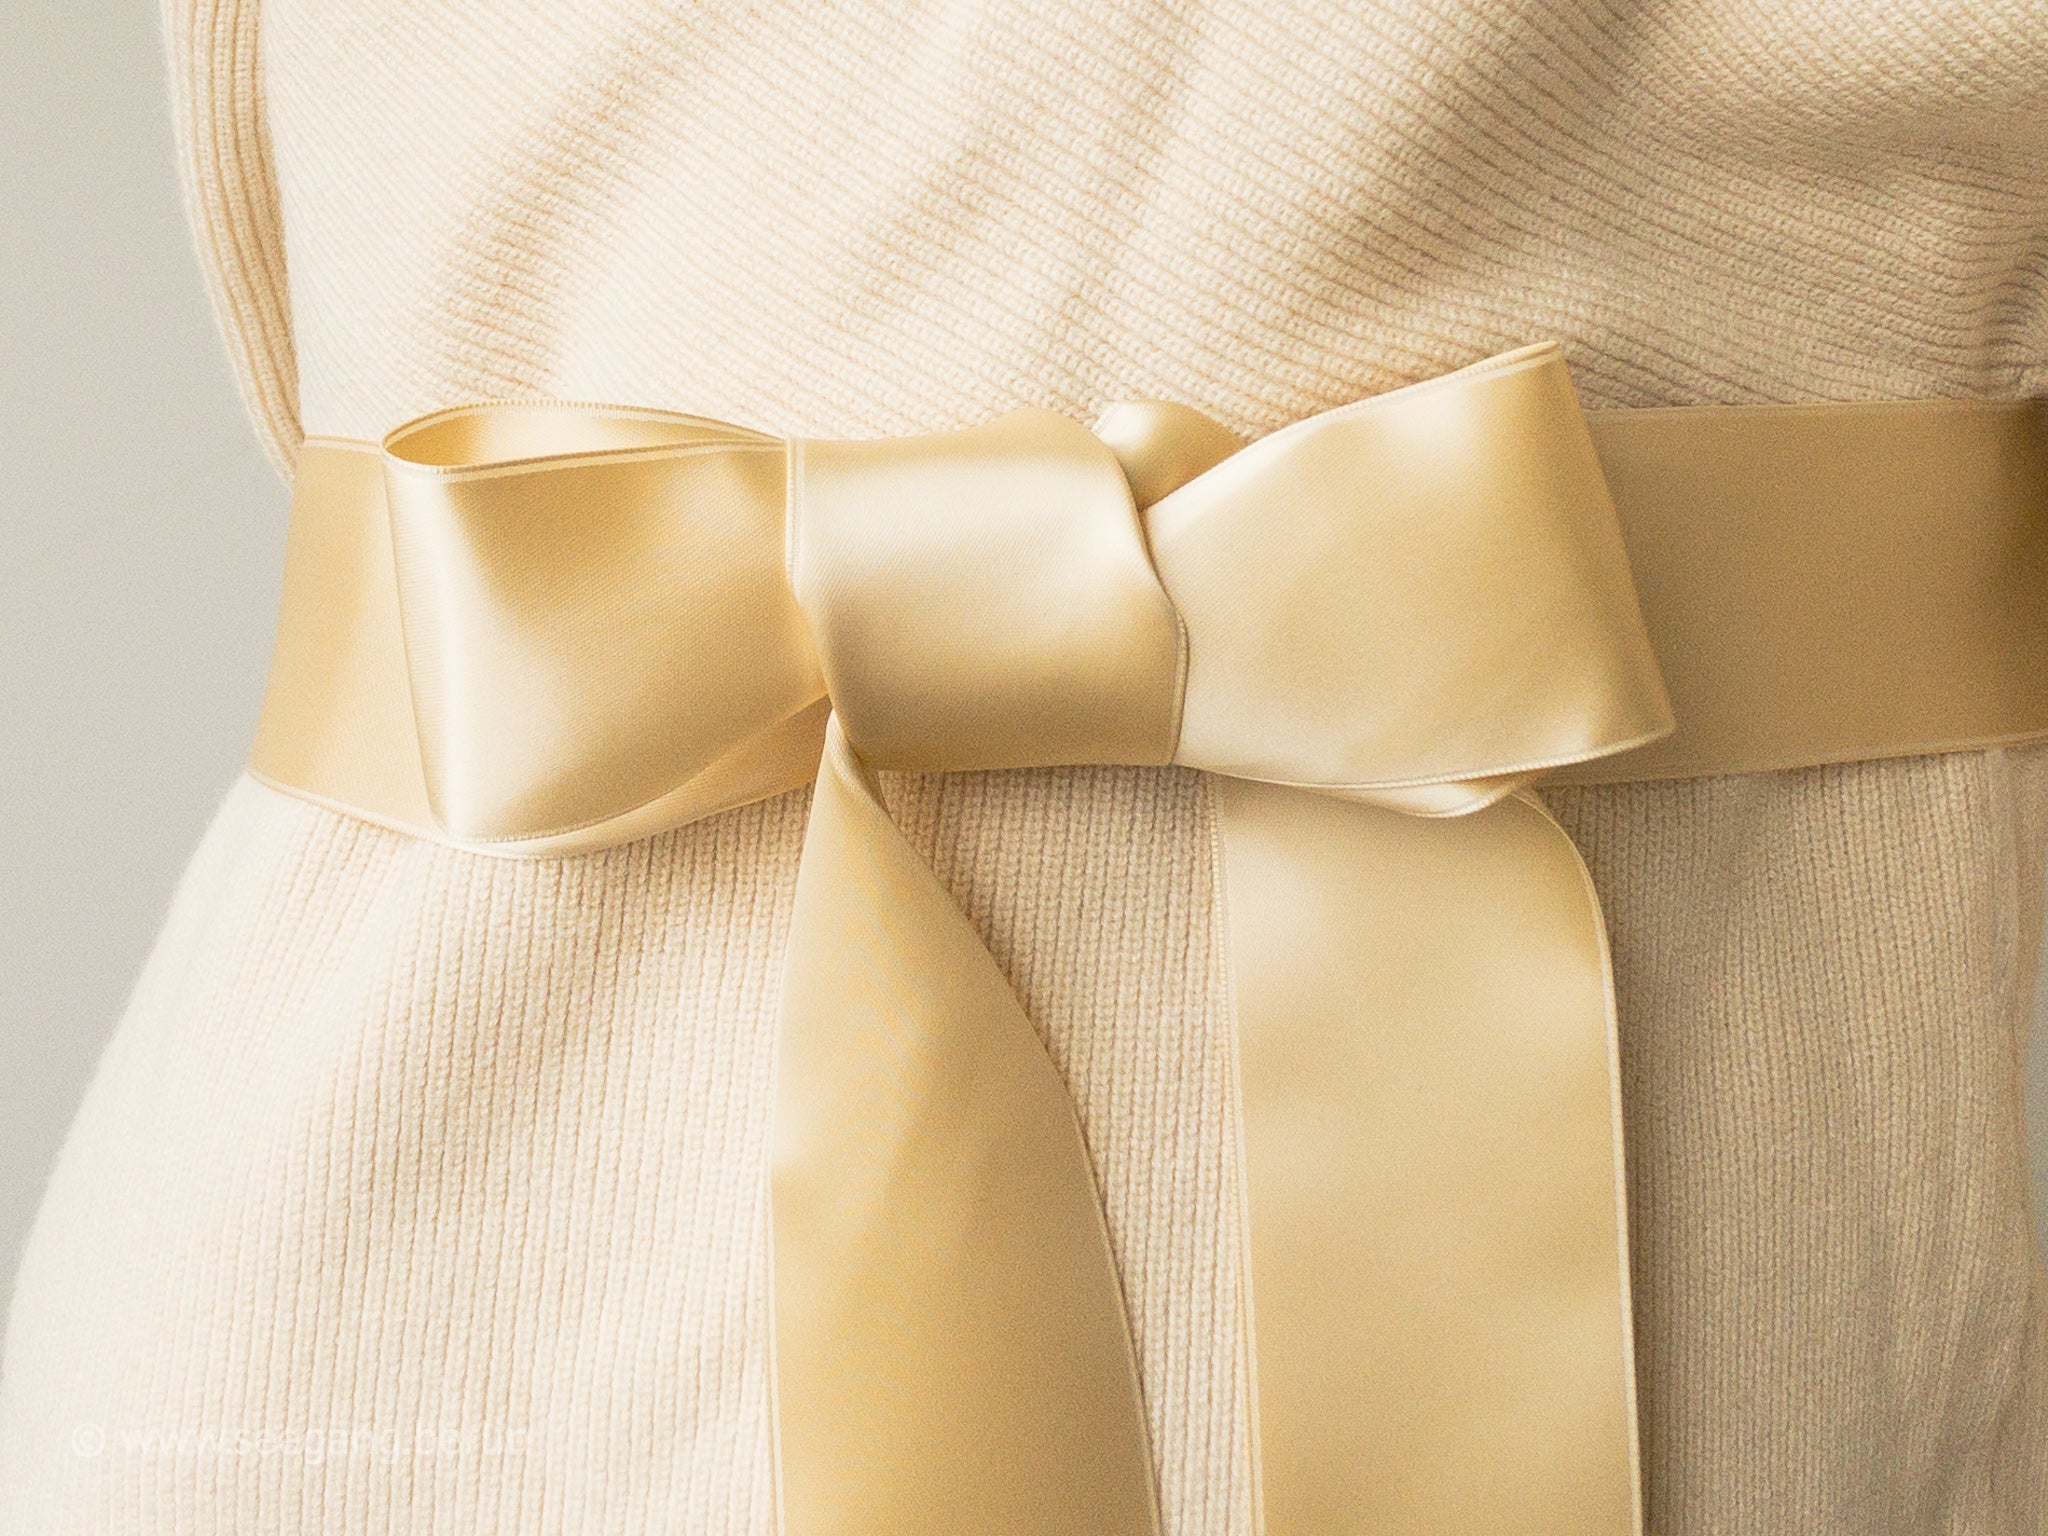 BRIDAL BELT IN SHADES OF WHITE: OFF WHITE, CREME, IVORY, CHAMPAGNE. SWISS QUALITY